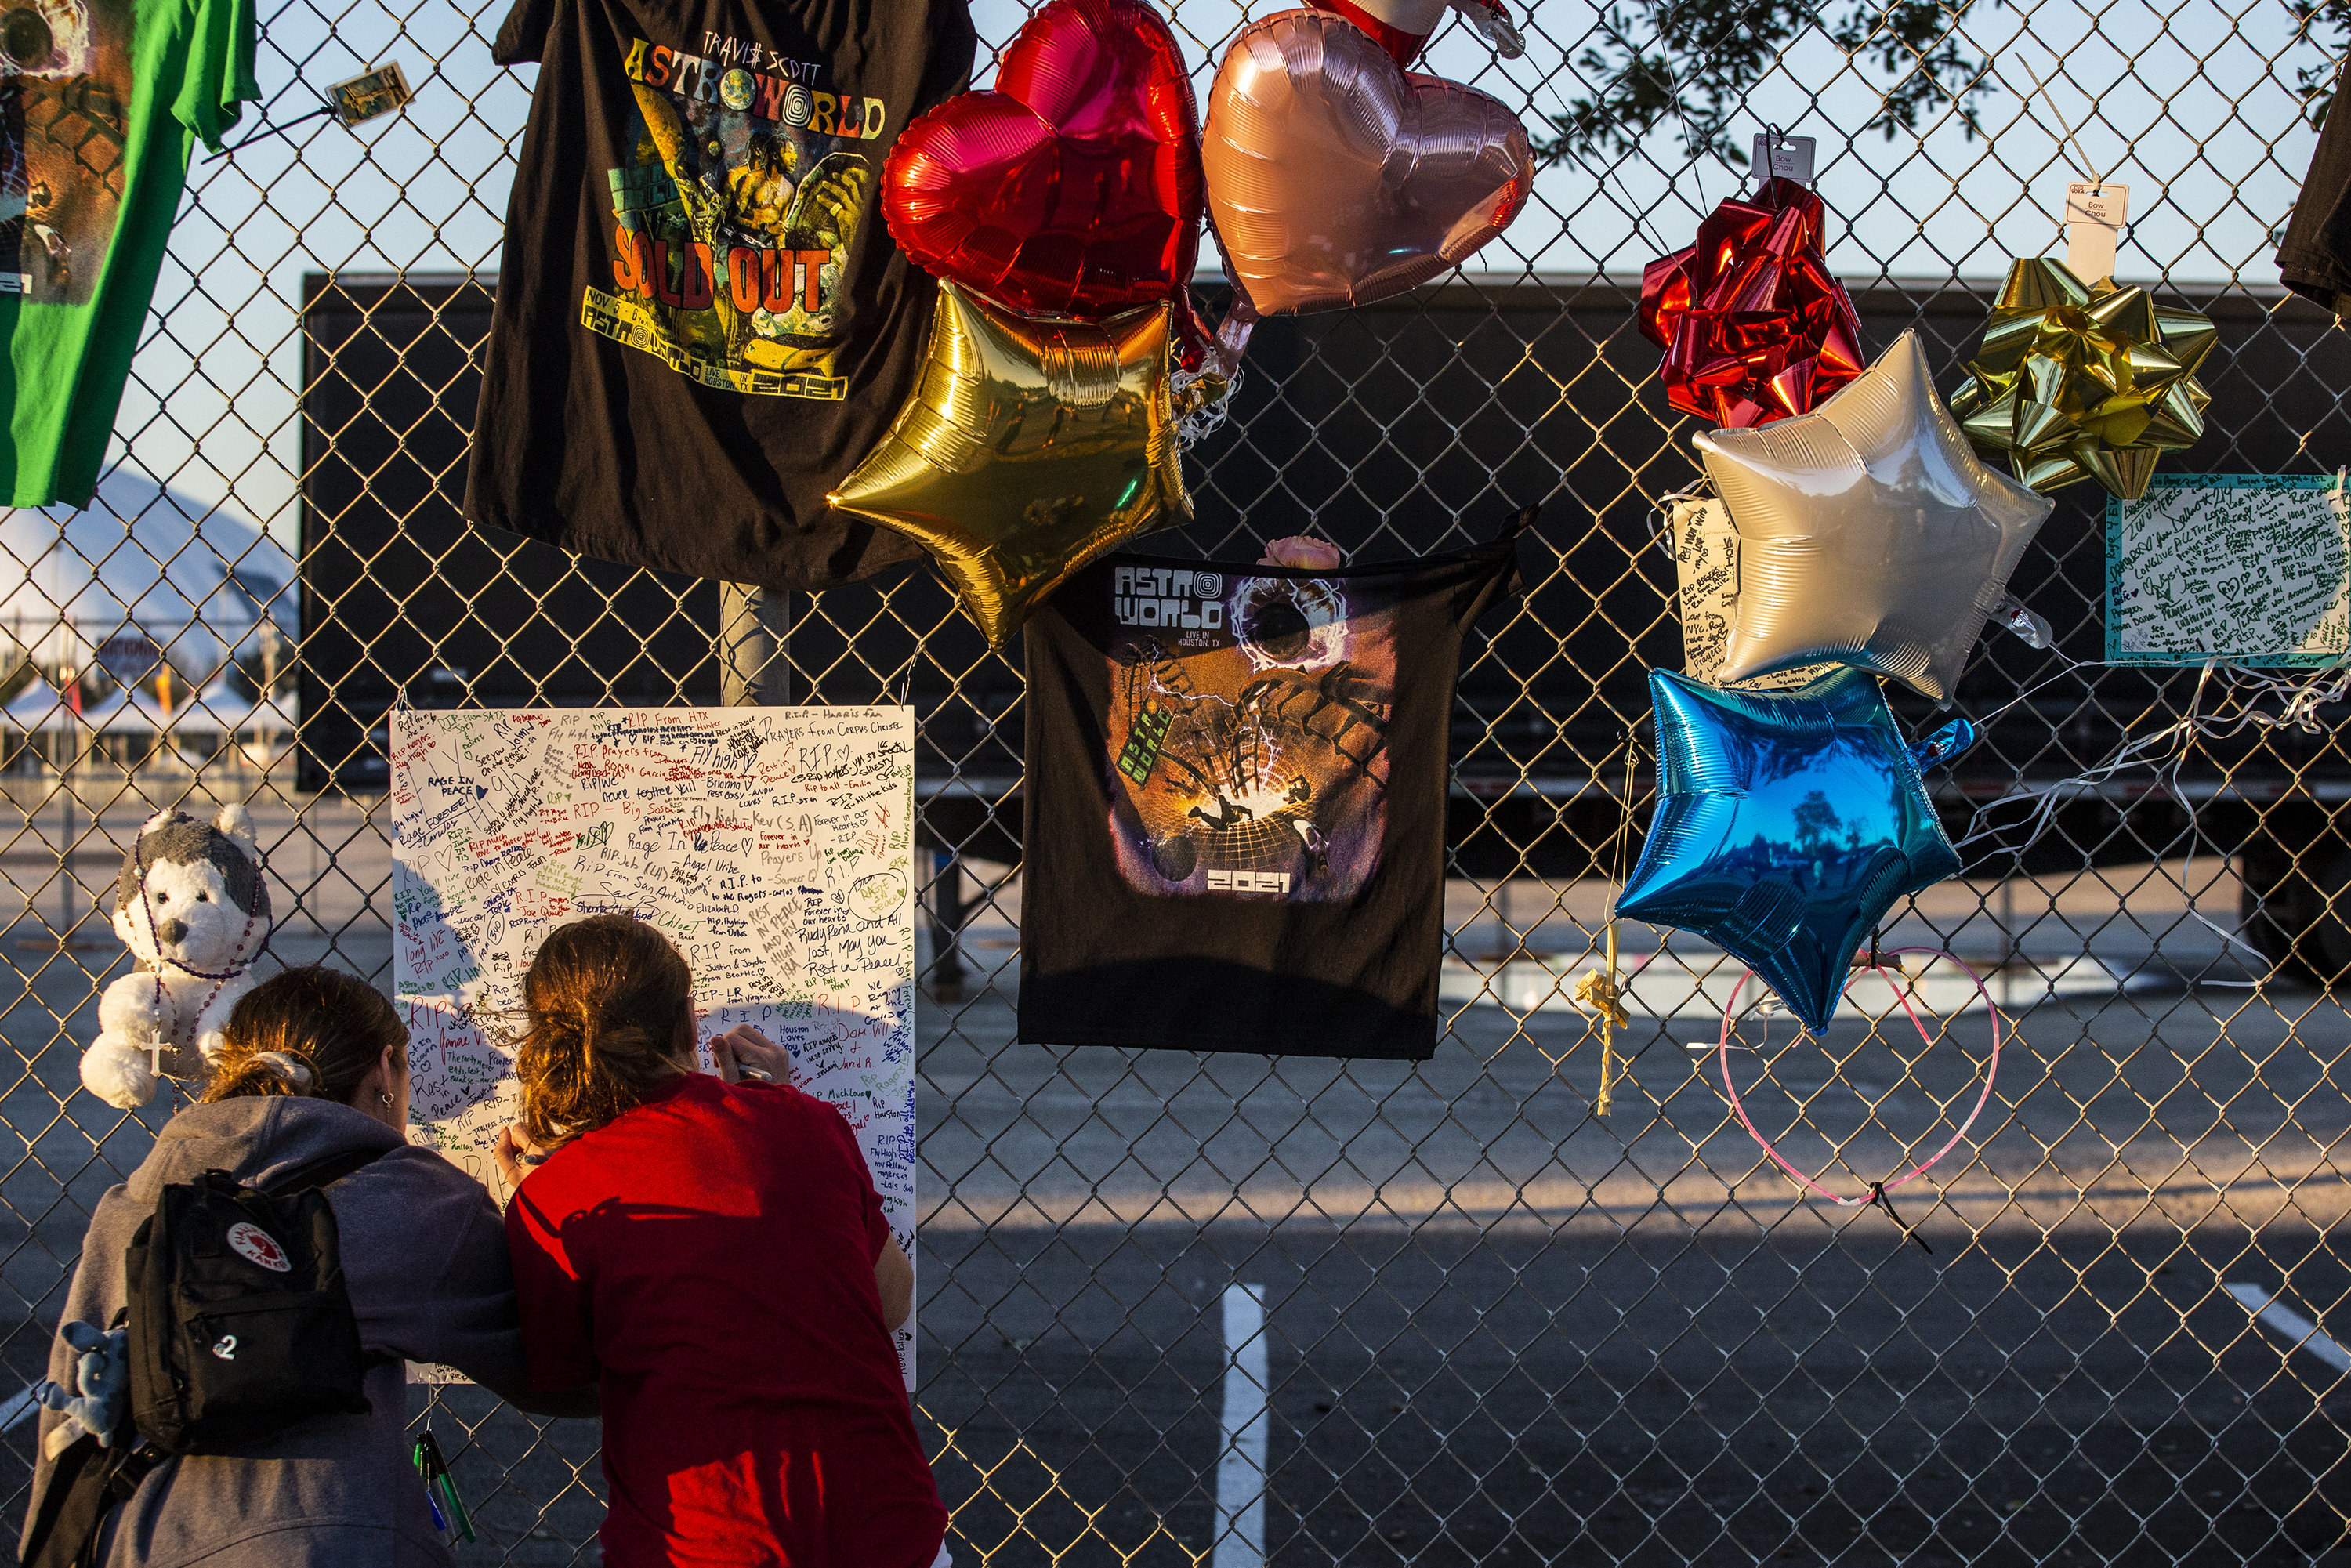 Two people write on a poster on a gate with balloons and other memorial items